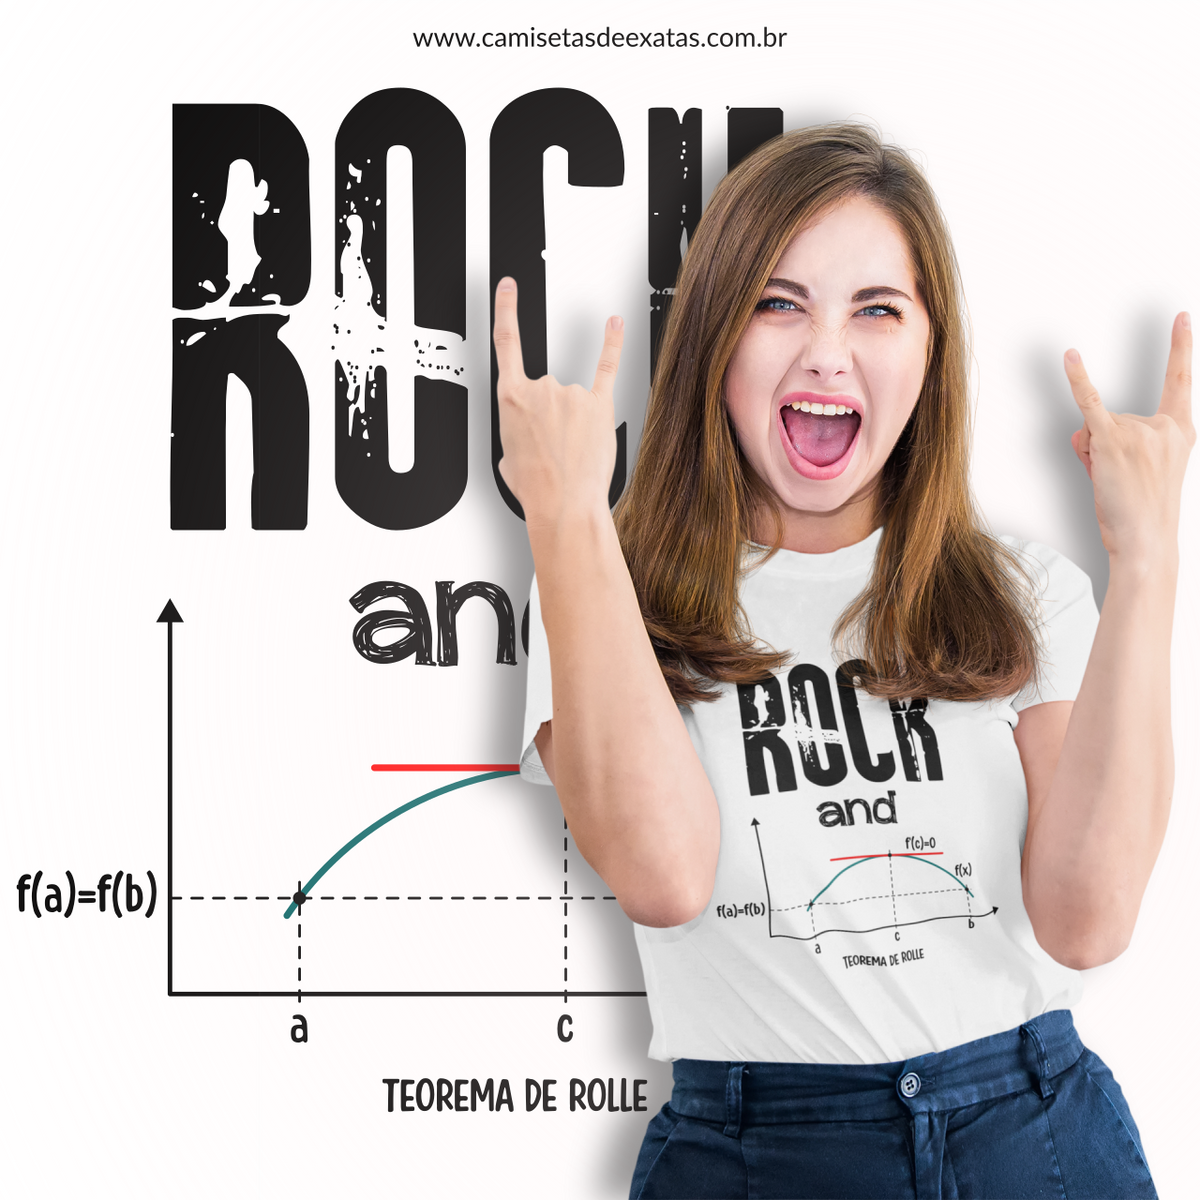 Nome do produto: ROCK AND ROLLE [1]